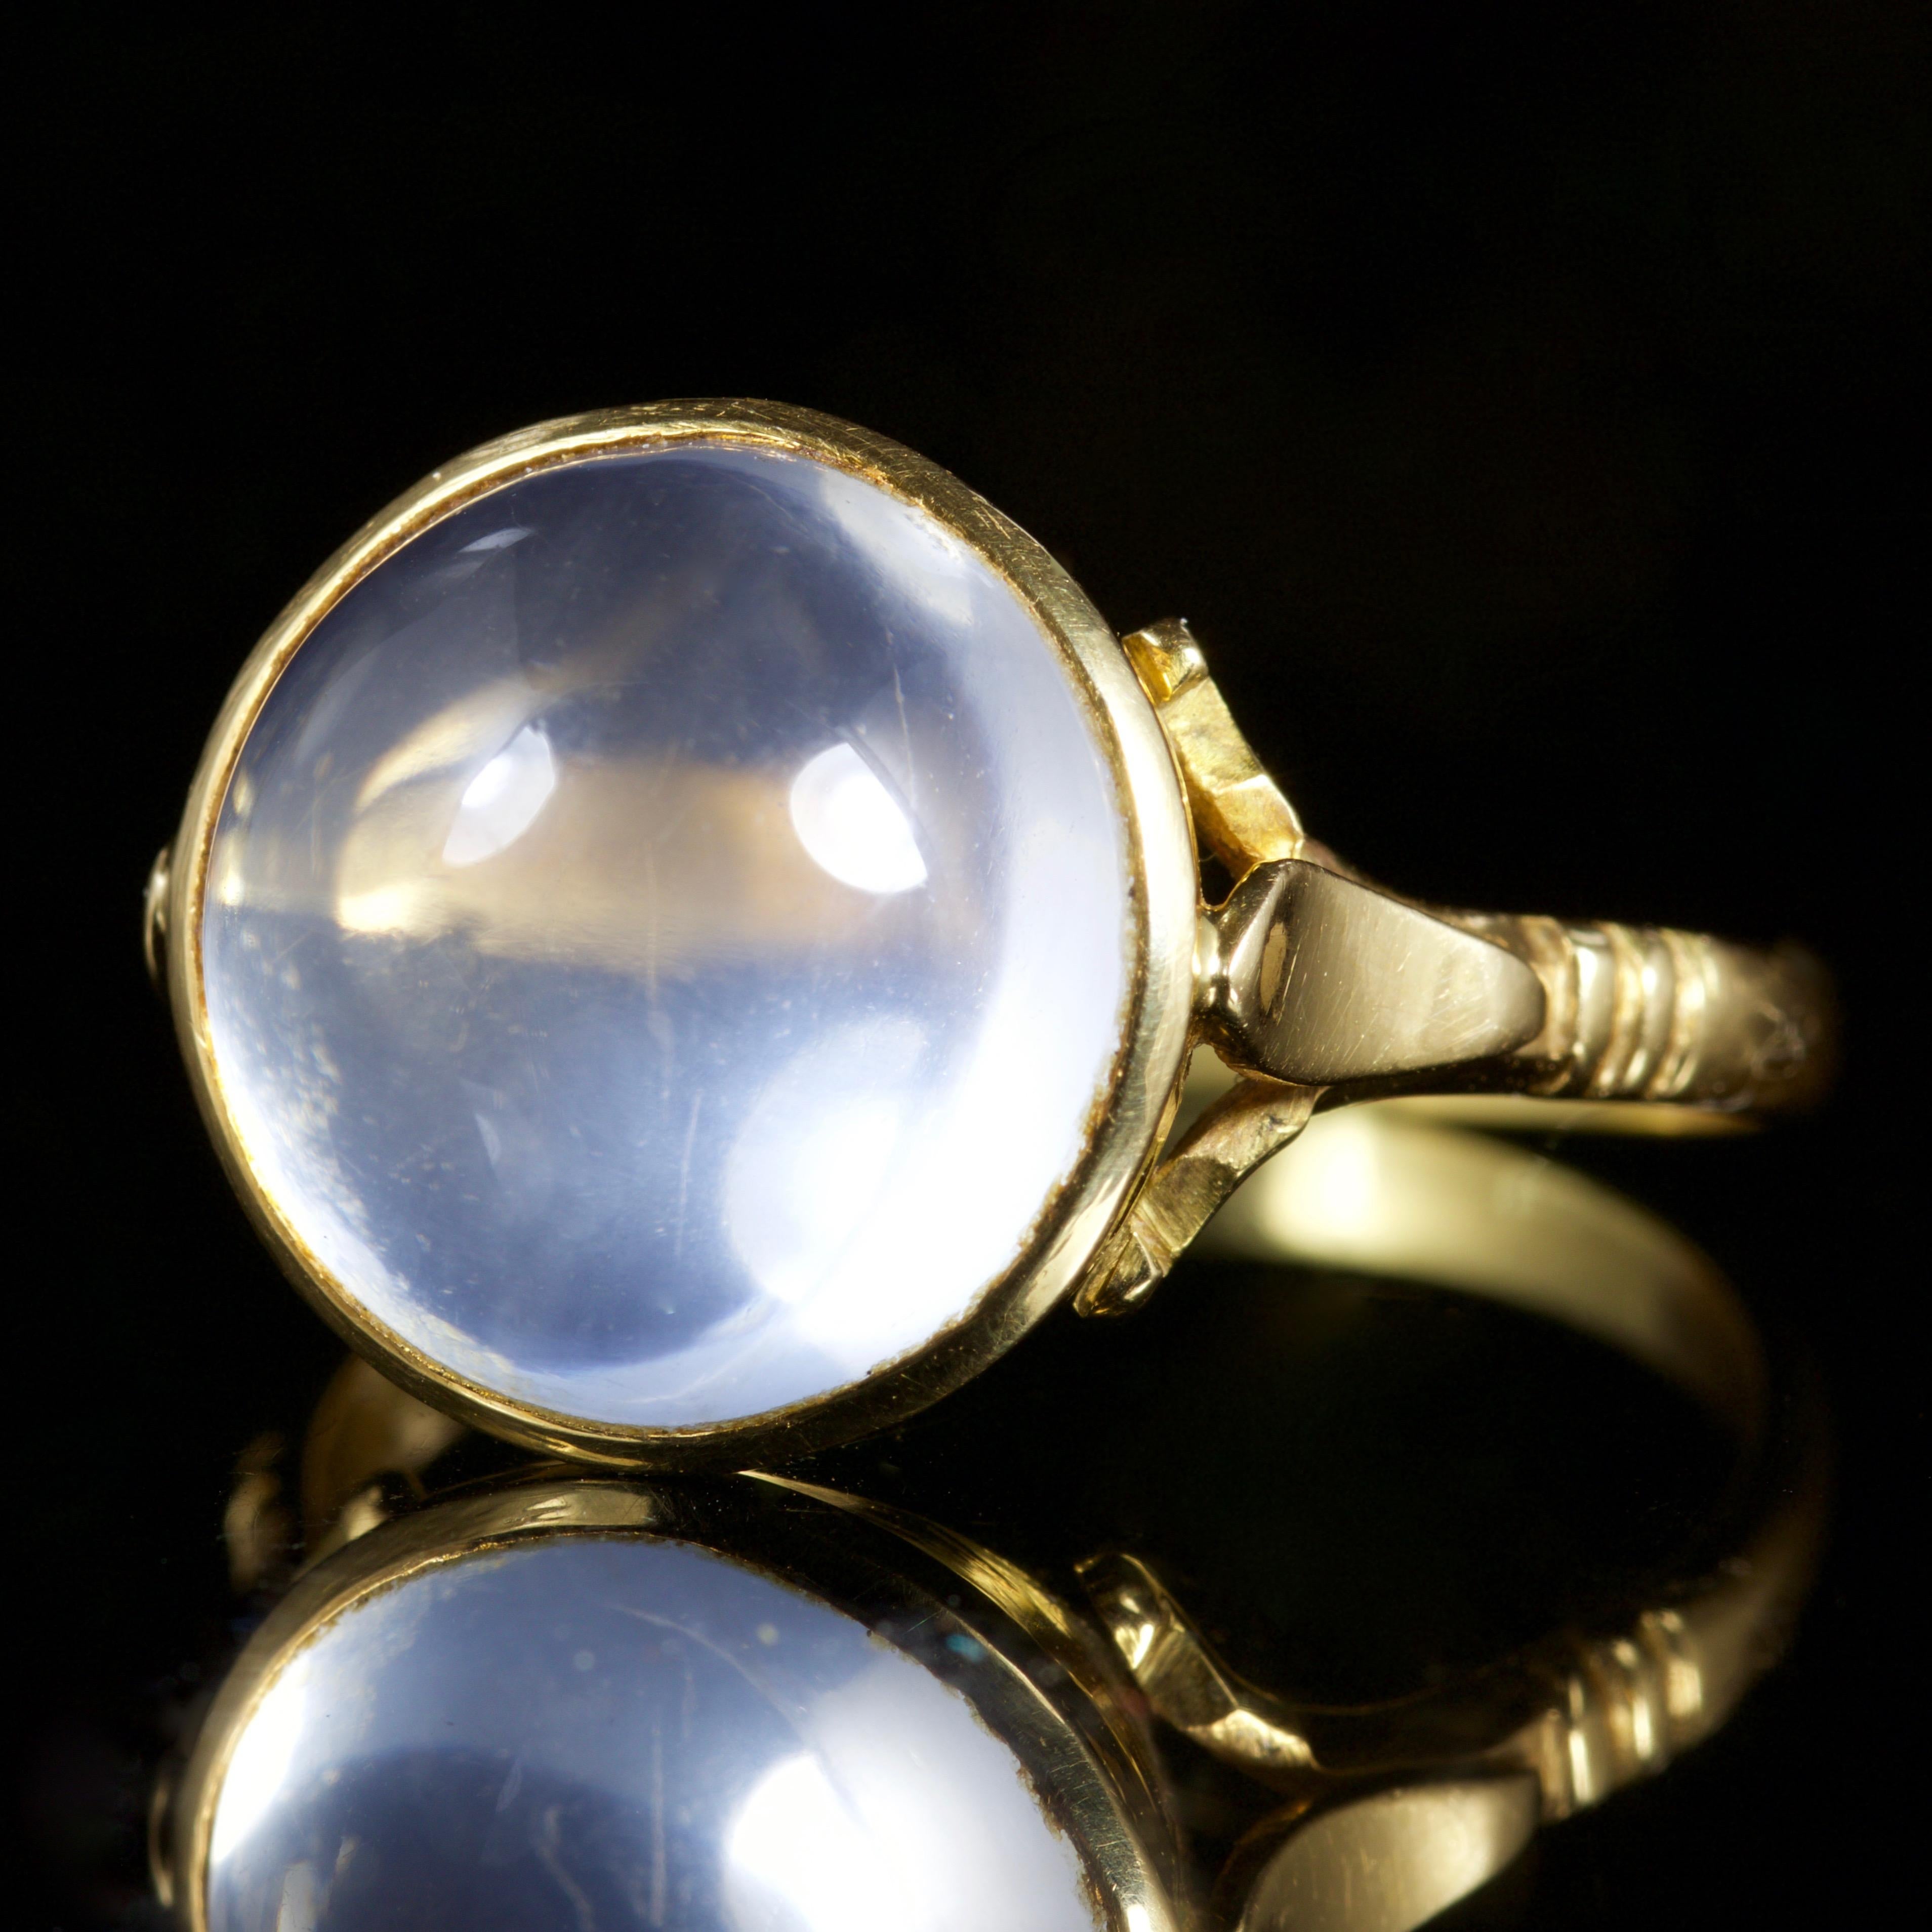 This genuine Victorian ring is set in 18ct Gold, Circa 1880.

The ring boasts a glowing Moonstone, which shows a wonderful hue from within.

The Moonstone is 7ct, it makes the ring such a great conversation starter.

The beautiful Moonstone has a